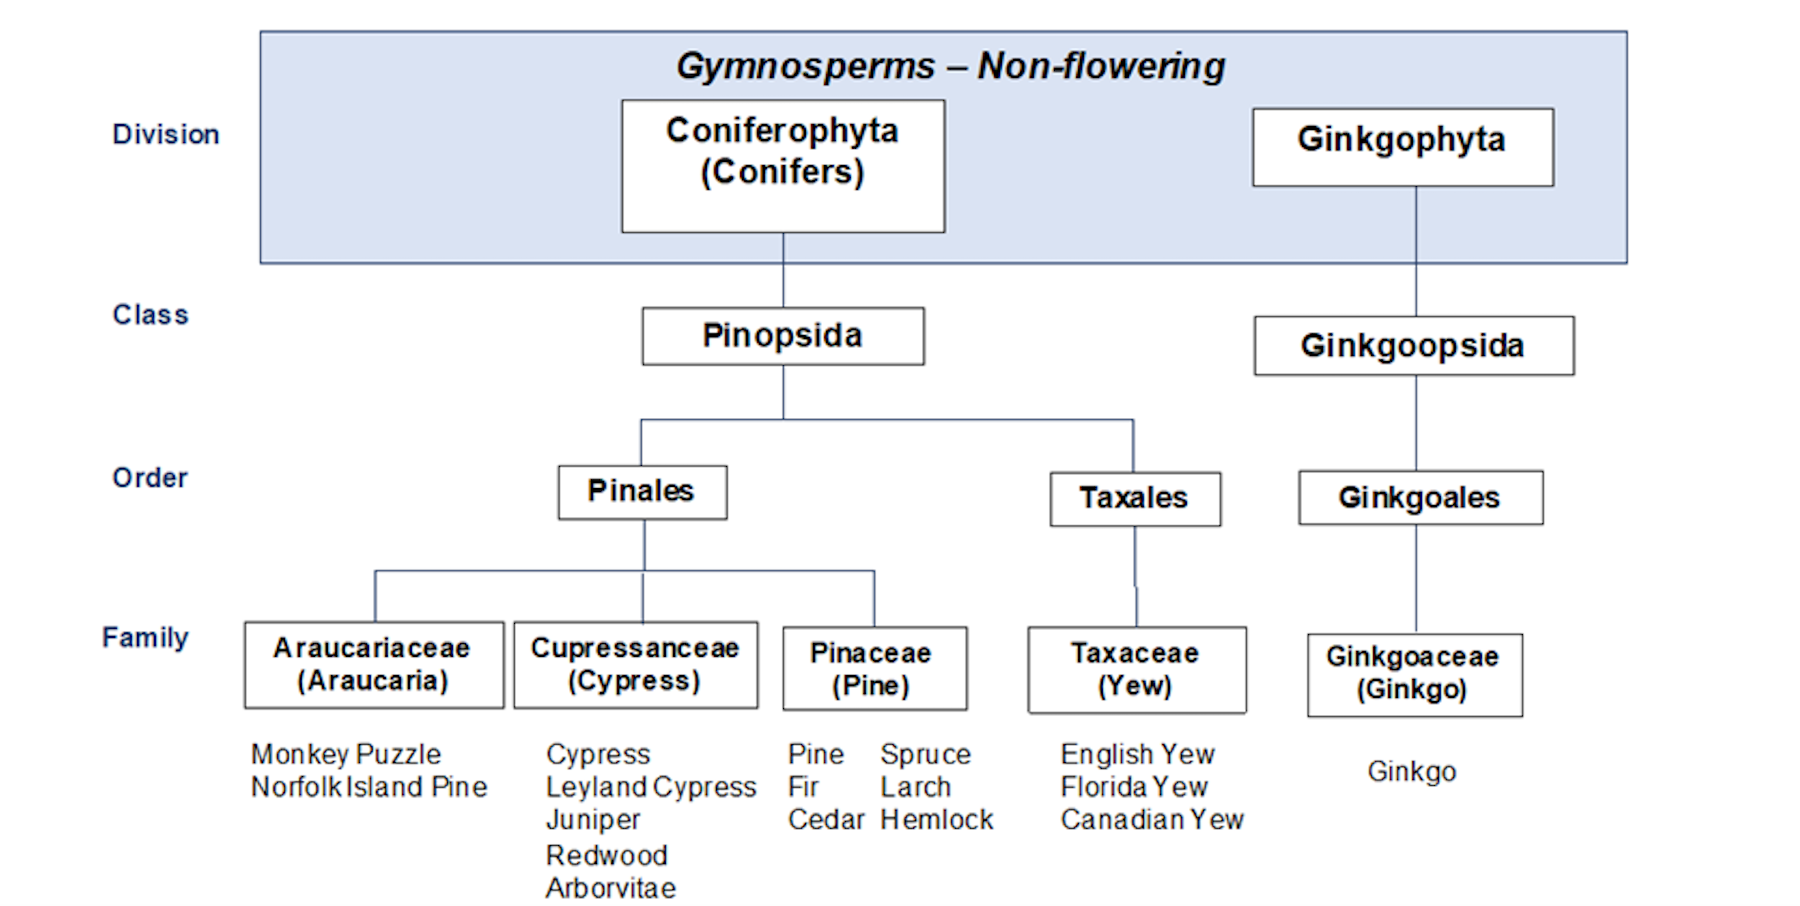 Chart showing gymnosperms-non-flowering at the top (division) with boxes for coniferophyta (conifers) and ginkogophyta. Line from Ginkogophyta goes to ginkgoopside (class) then ginkgoales (order) then ginkgoaceae, ginkgo (family) and Ginko the common name below. Line from Coniferophyta (conifers) (division) down to pinopsida (class) then pinnacles and taxales (order). Line from Taxales goes to (family) taxaceae (yew) and shows common names english yew, Florida yew, and Canadian yew. Line from Pinales goes to (family) araucariaceae (araucaria) with common names monkey puzzle and Norfolk Island pine, cupressanceae (cypress) with common names cypress, Leyland Cypress, juniper, redwood, and arborvitae, and pinaceae (pine) with common names pine, fir, cedar, spruce, larch, hemlock.